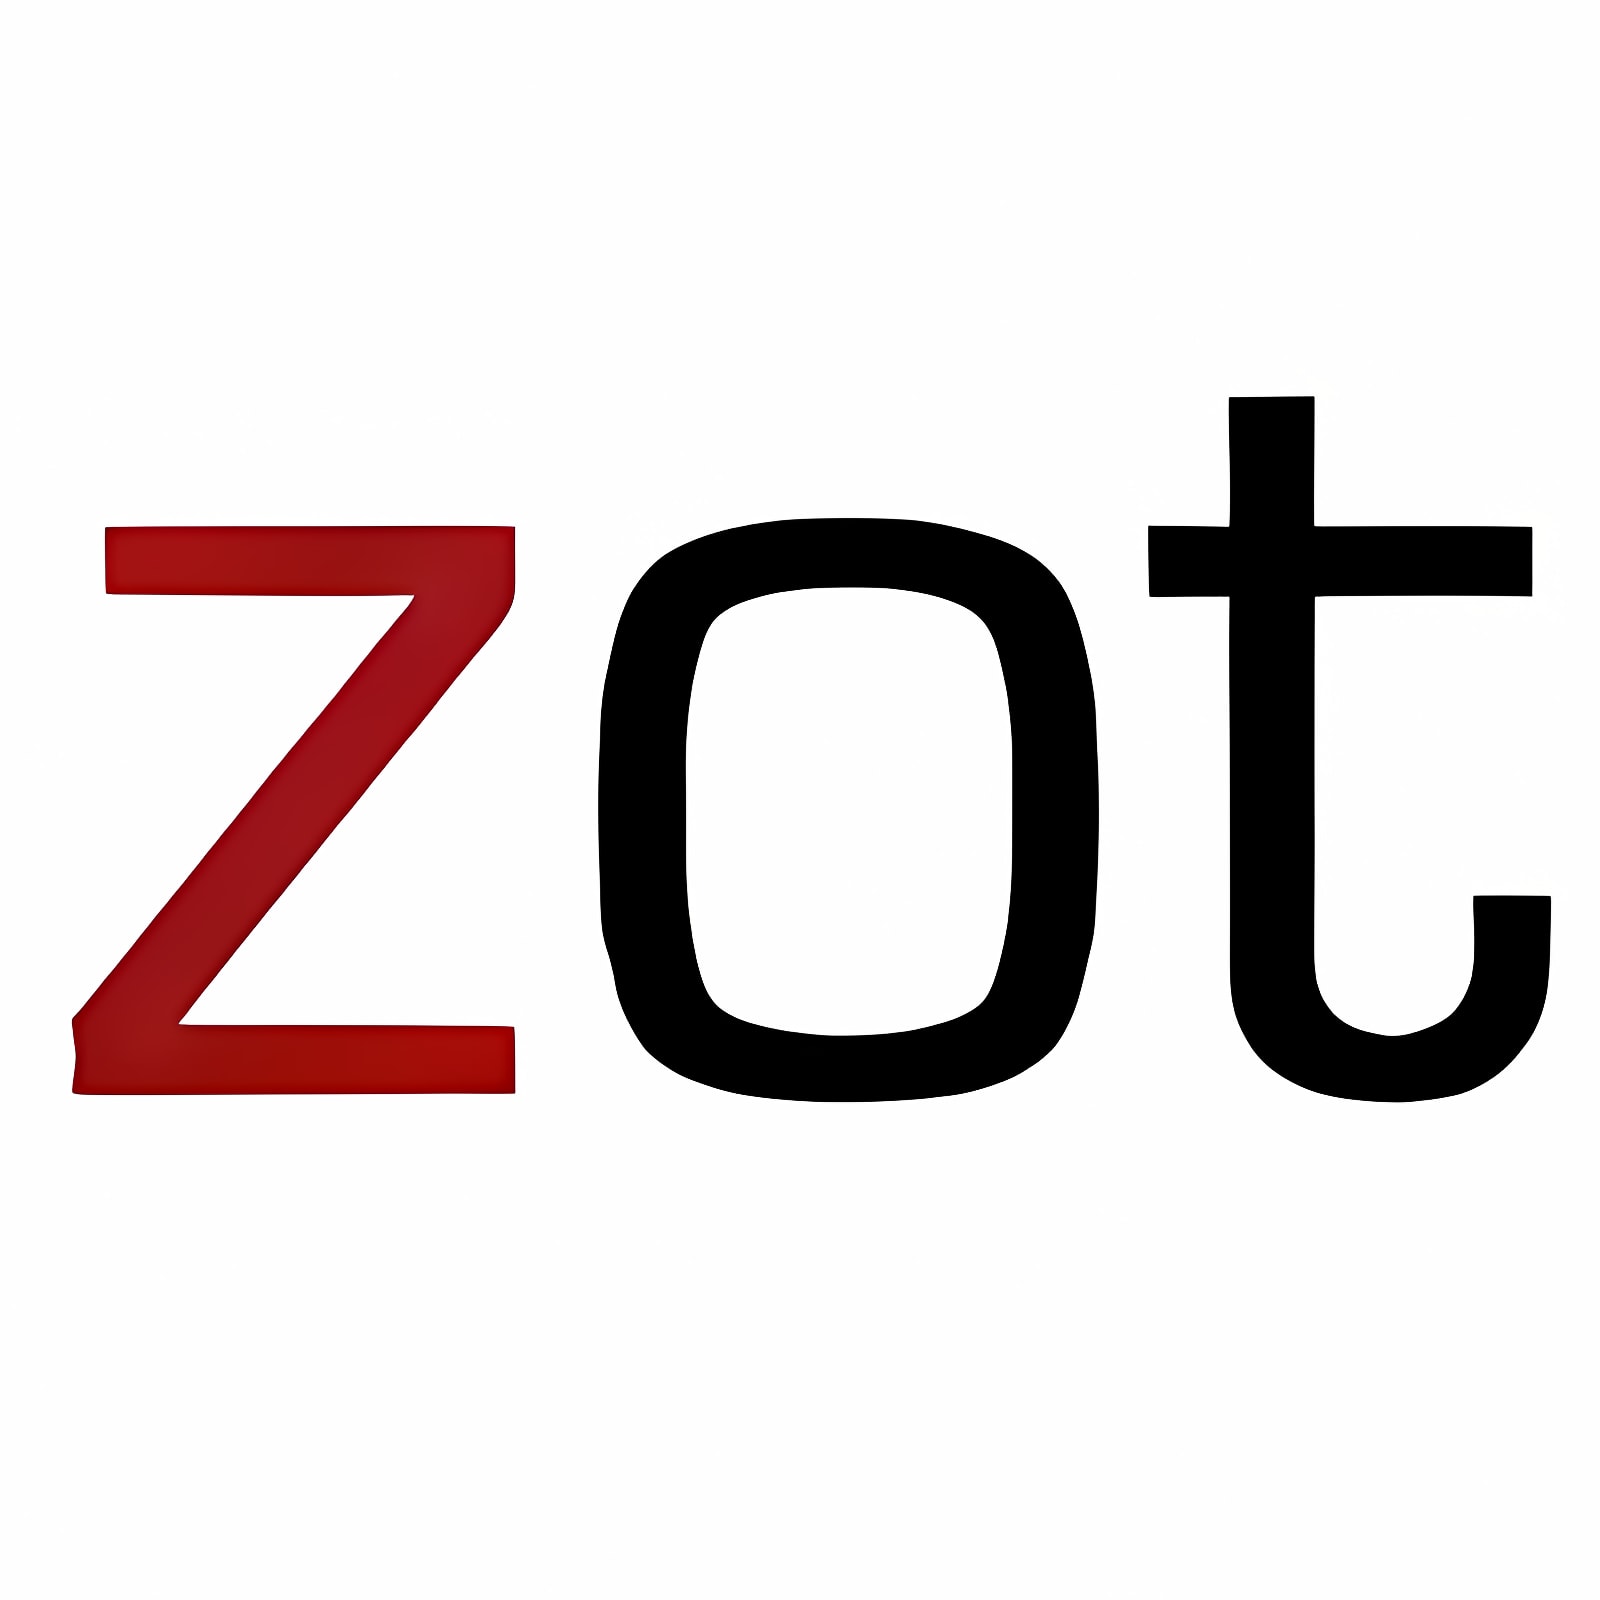 for iphone download Zotero 6.0.27 free